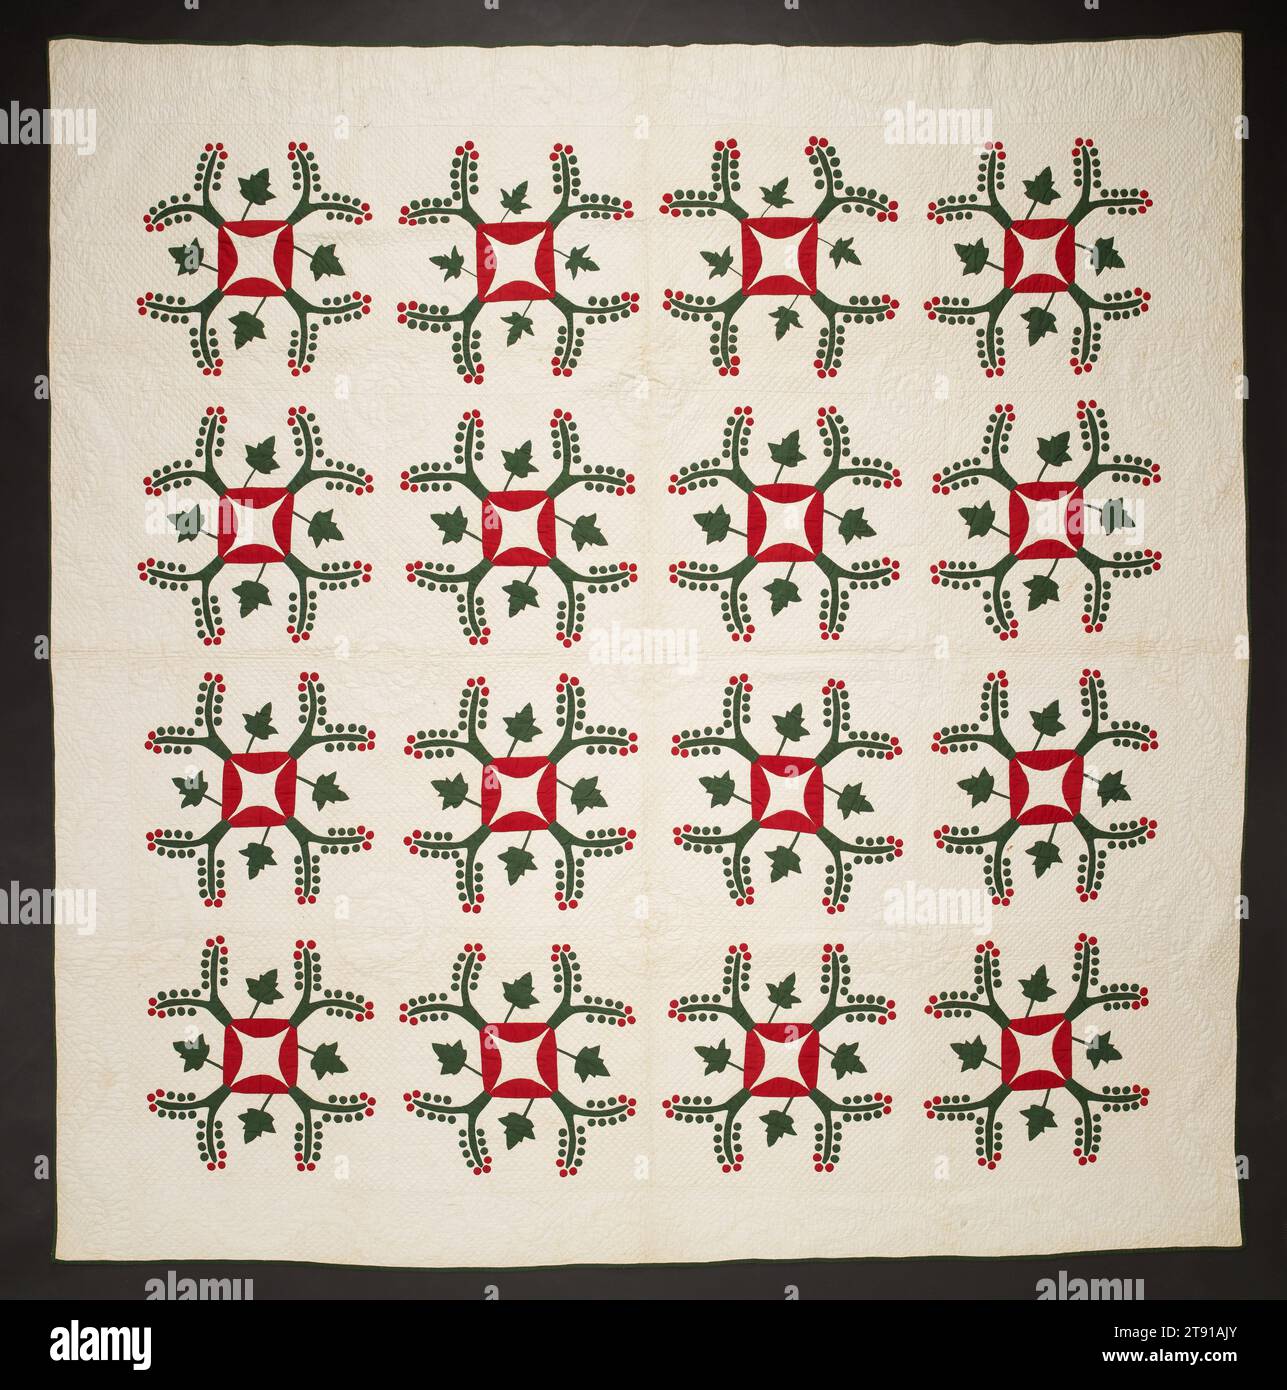 Cherry quilt, 1859, Mary Ellen Jones, American, (Maine), born 1839, 95 x 97 in. (241.3 x 246.38 cm), Cotton; pieced, appliquéd, and quilted, United States, 19th century, Mary Ellen Jones completed what she called her 'cherry quilt' in 1859, when she was twenty years old. Typically, quilts have three layers: a cloth top; a middle layer of cotton batting, cloth, or even paper; and a cloth backing. This one lacks a middle layer, a design choice that facilitated Jones’s fine stitching. She packed up to fourteen tiny stitches into one inch of hand quilting. Stock Photo